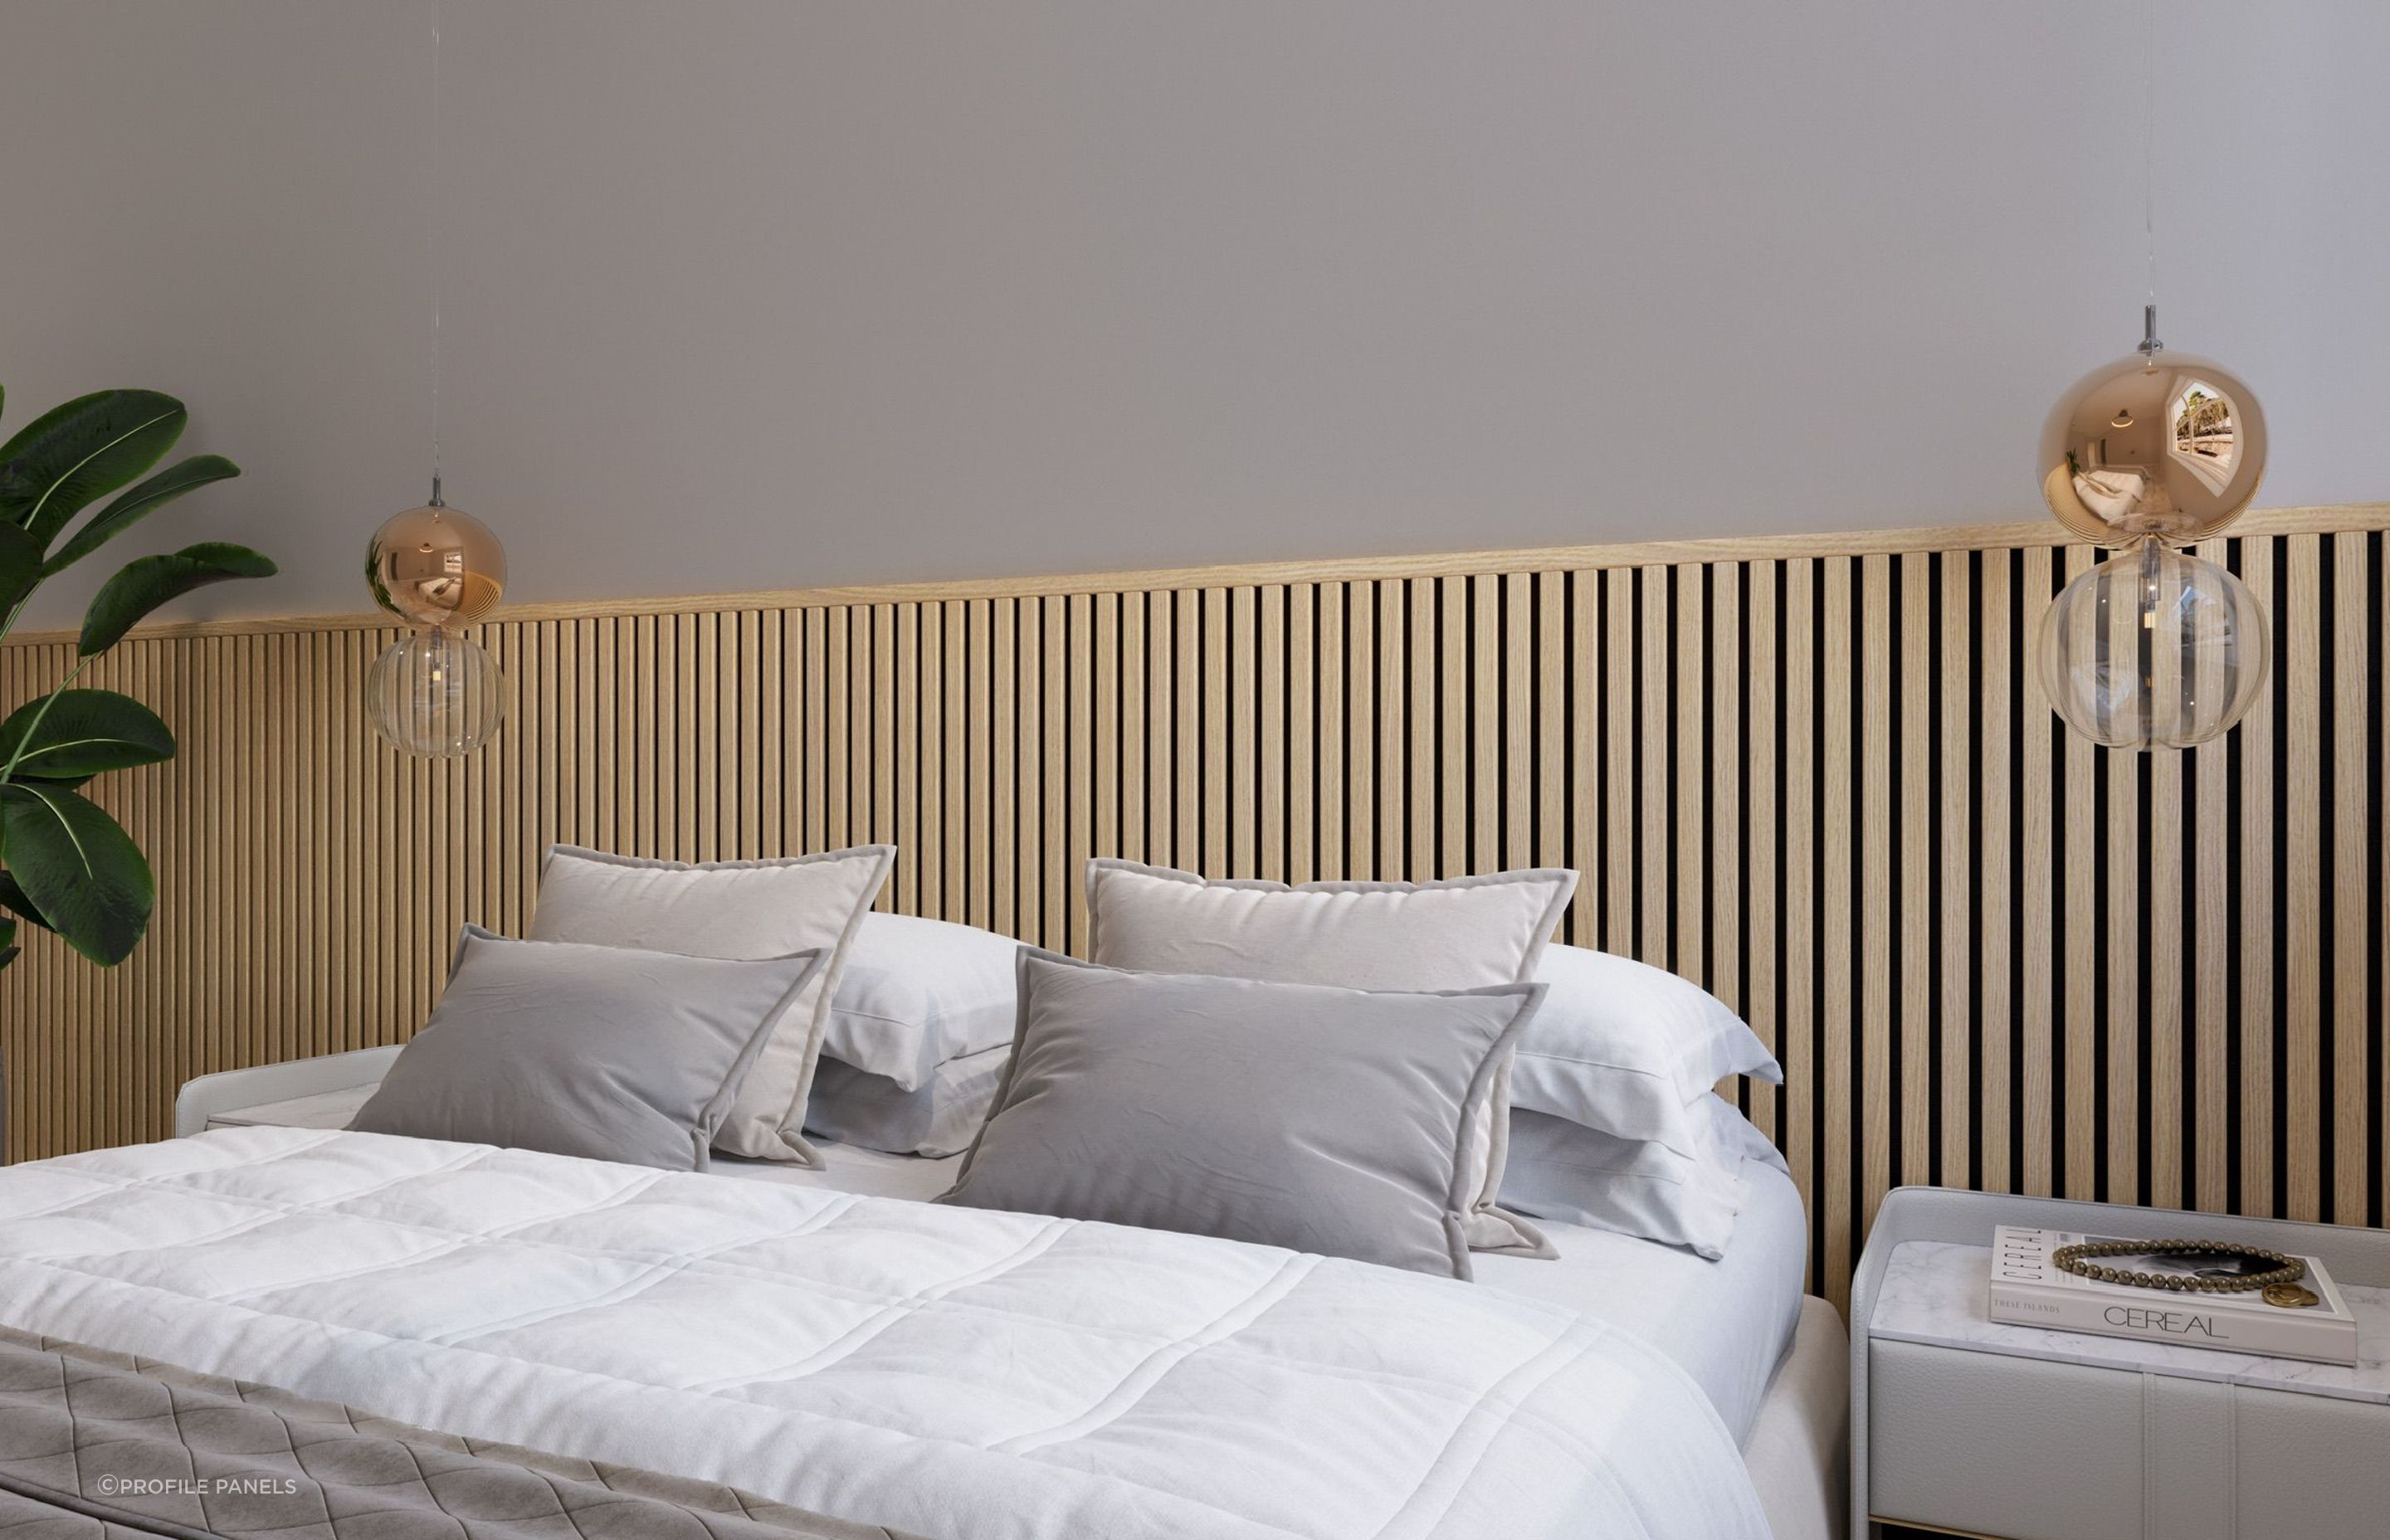 Profile Panels' Half Slat Panels are idea for bed heads, with acoustic backing to help you sleep sound.